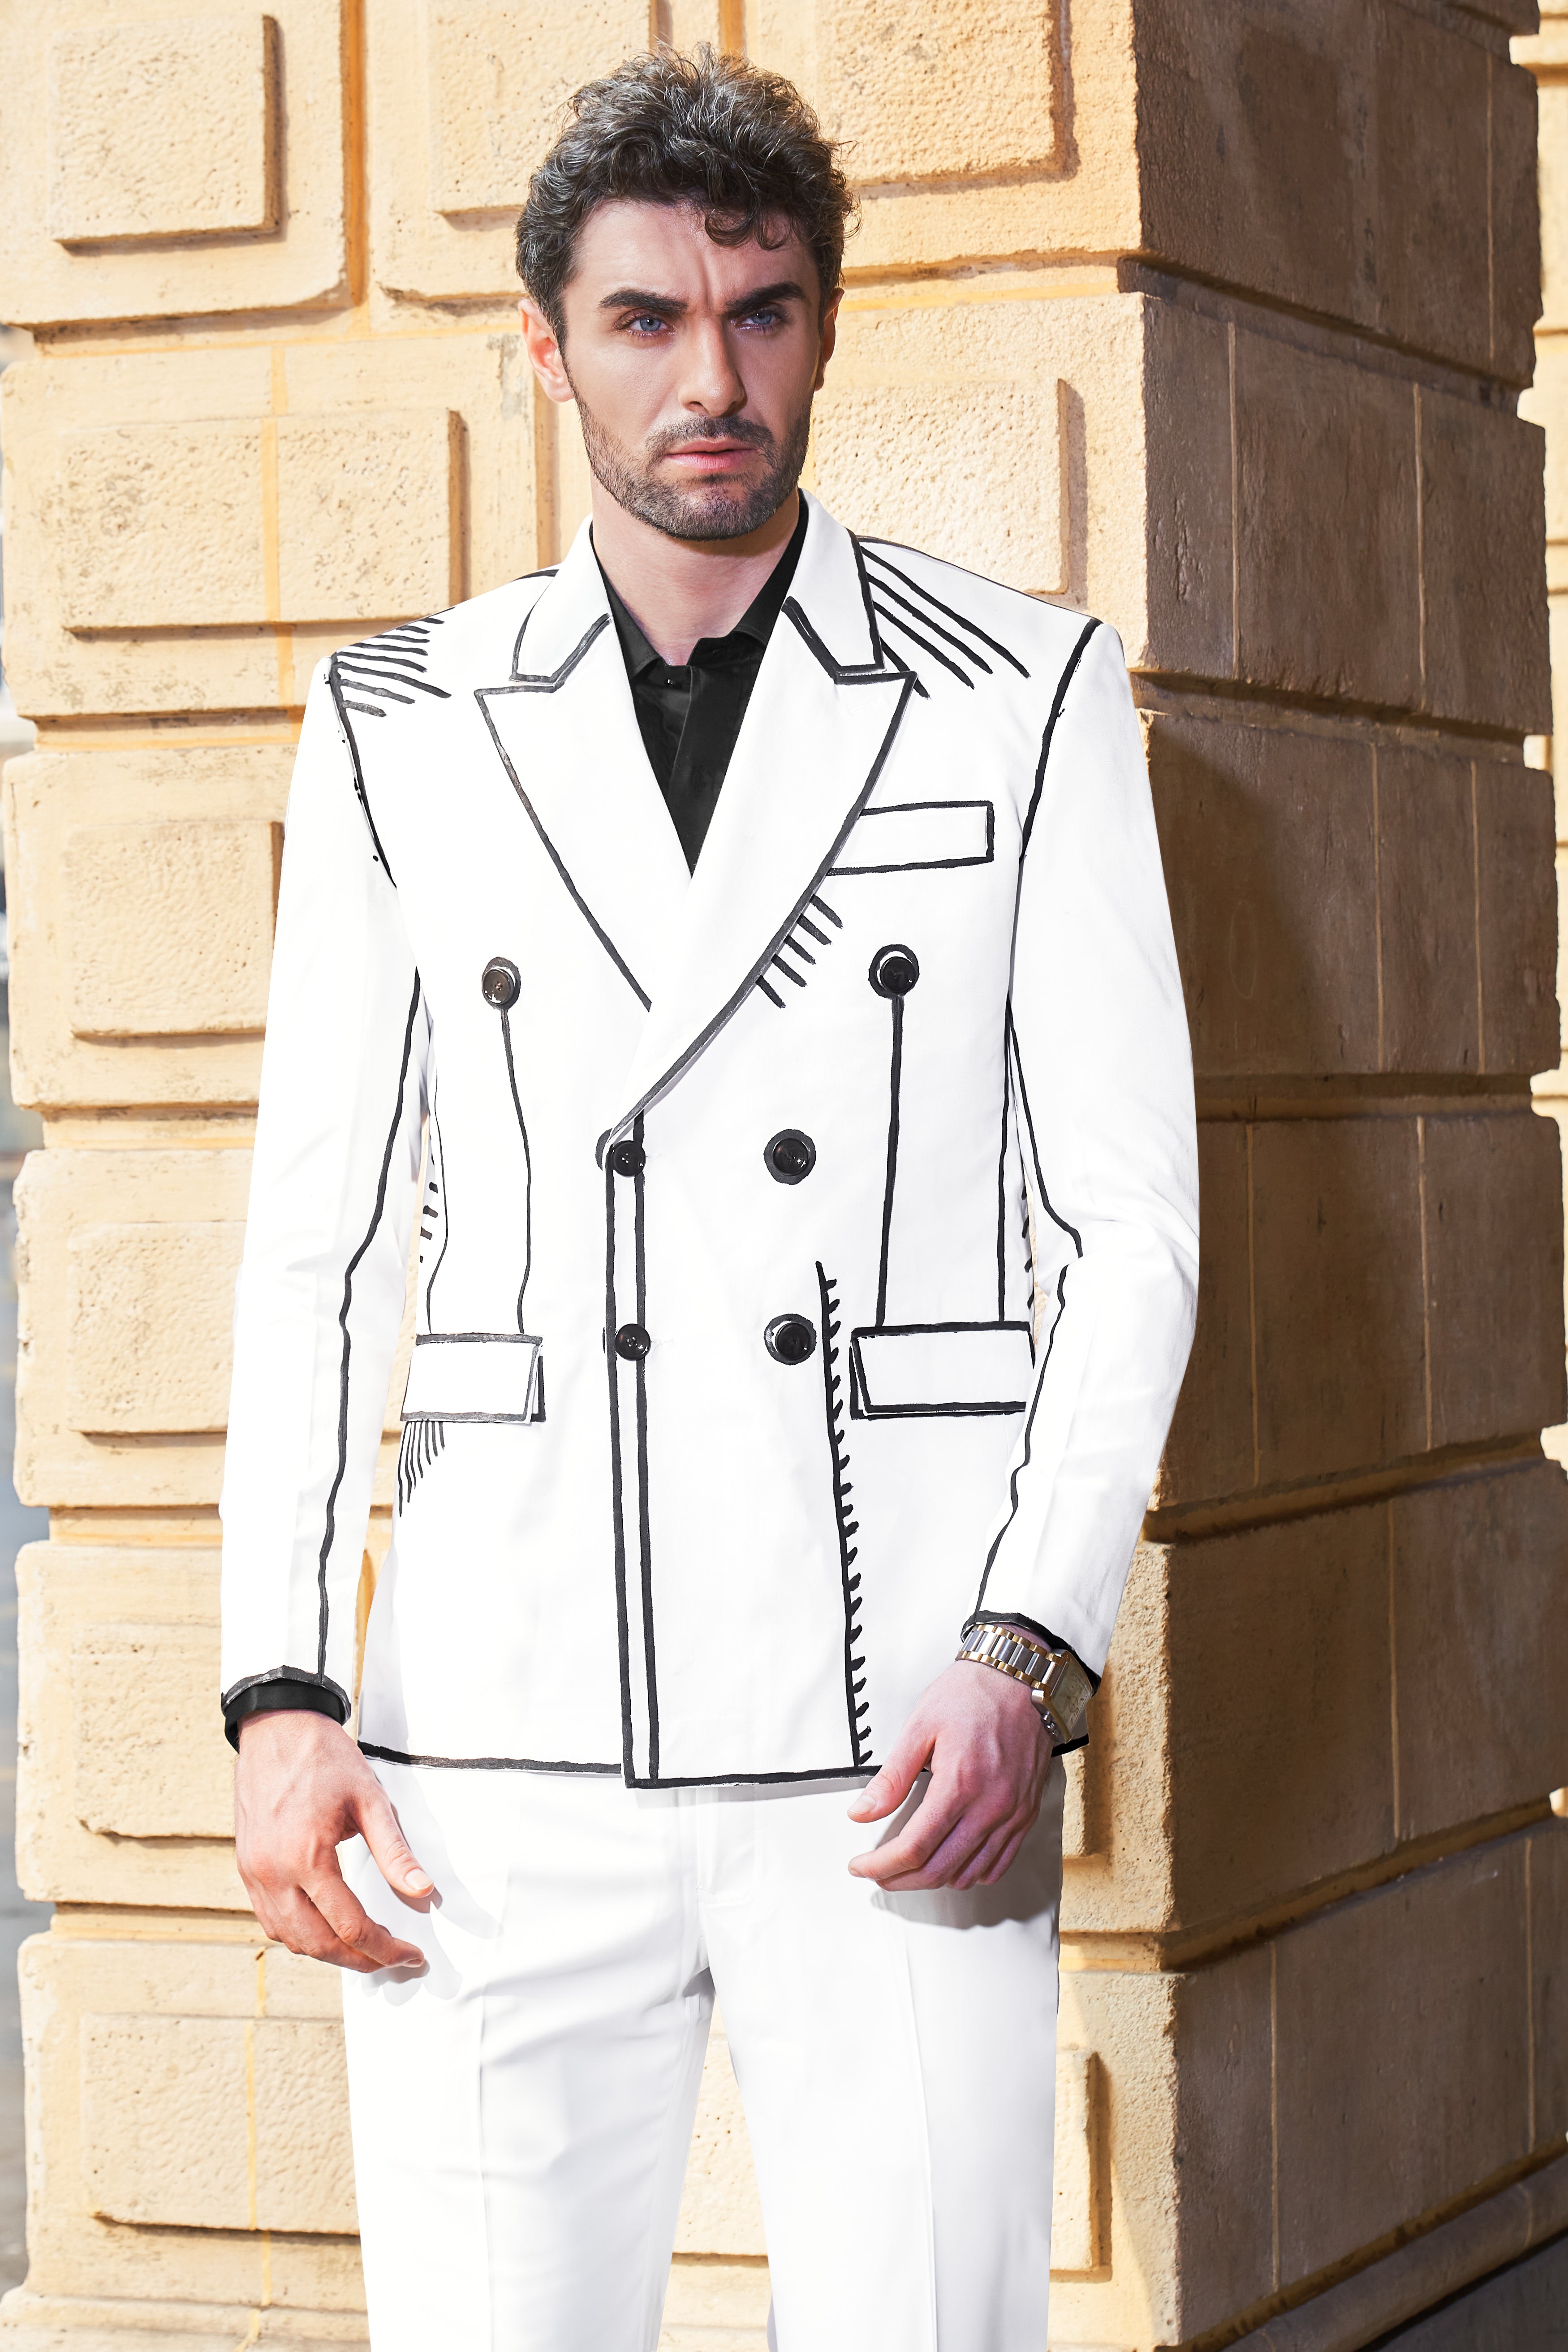 Bright White with Black Hand Painted Wool Rich Designer Suit ST3010-DB-ART-36, ST3010-DB-ART-38, ST3010-DB-ART-40, ST3010-DB-ART-42, ST3010-DB-ART-44, ST3010-DB-ART-46, ST3010-DB-ART-48, ST3010-DB-ART-50, ST3010-DB-ART-52, ST3010-DB-ART-54, ST3010-DB-ART-56, ST3010-DB-ART-58, ST3010-DB-ART-60